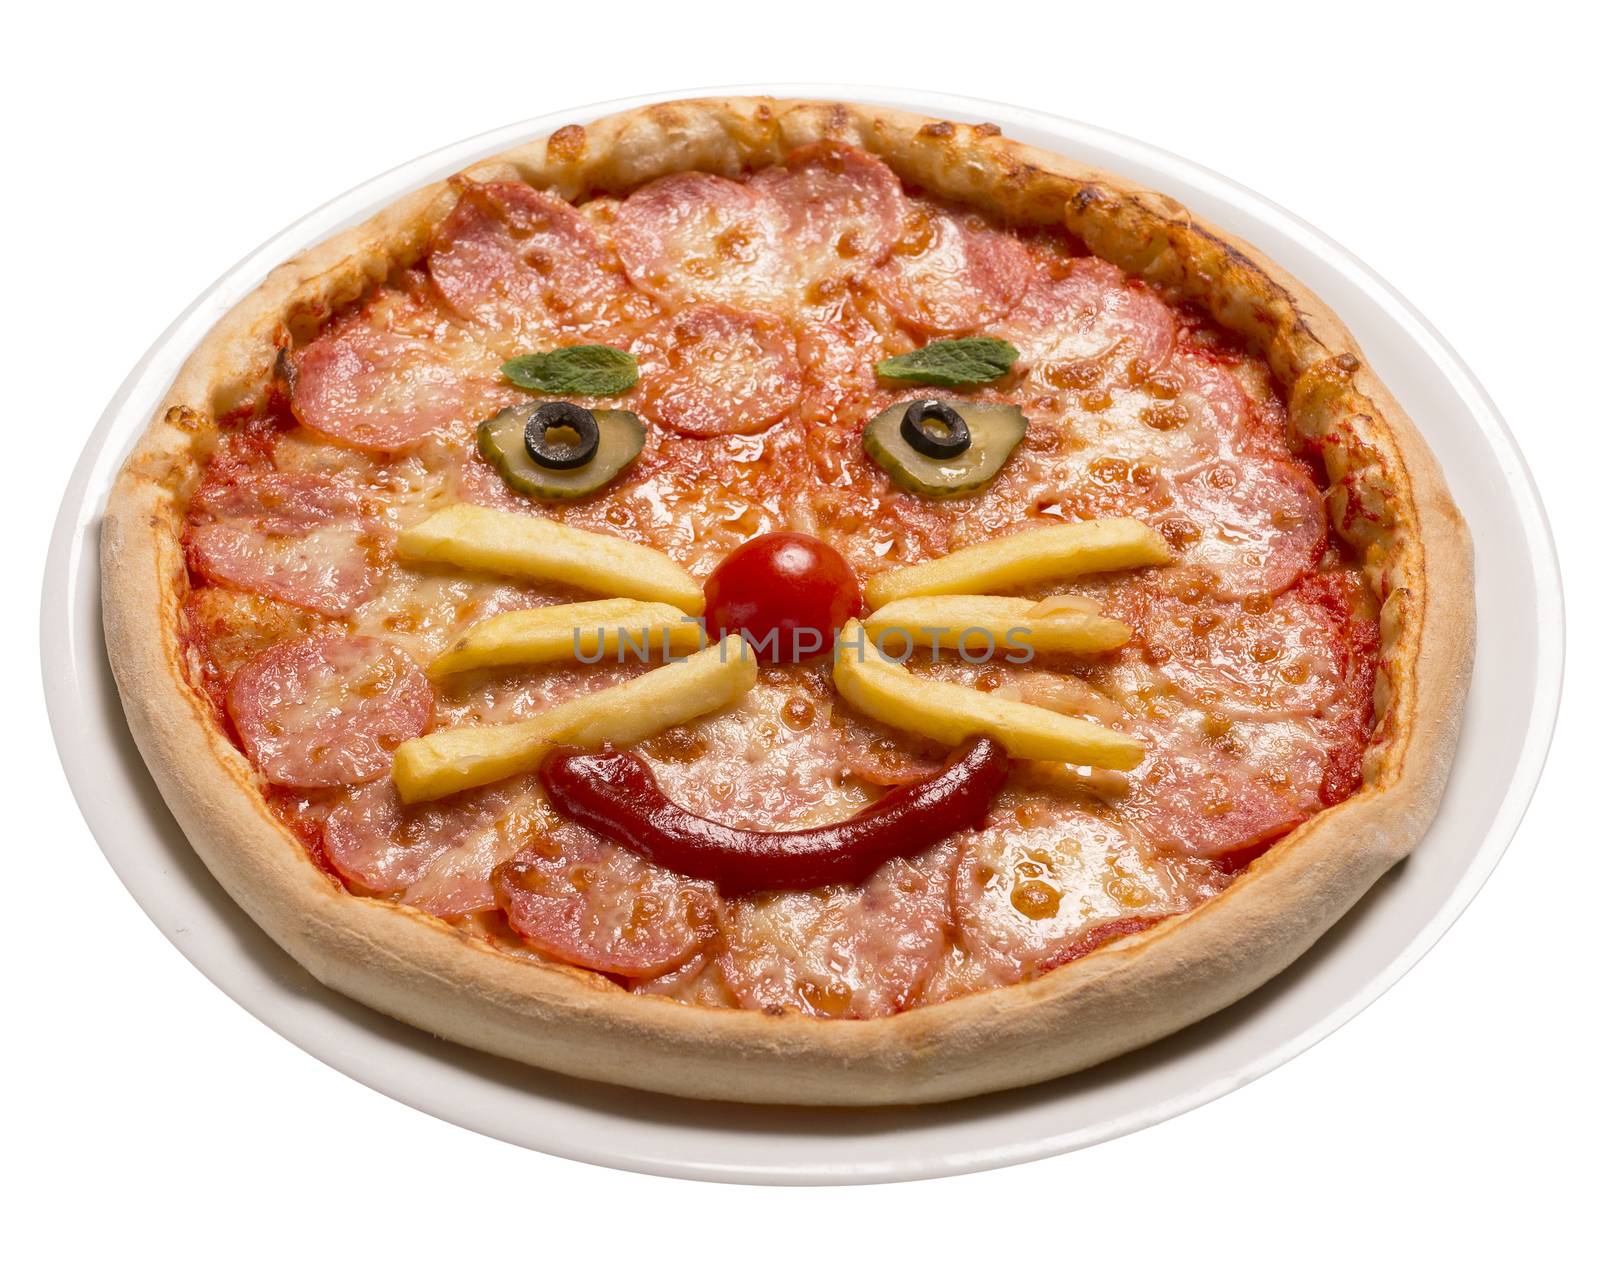 Pepperoni children's pizza will see a smiley face Isolated image on white by 977_ReX_977